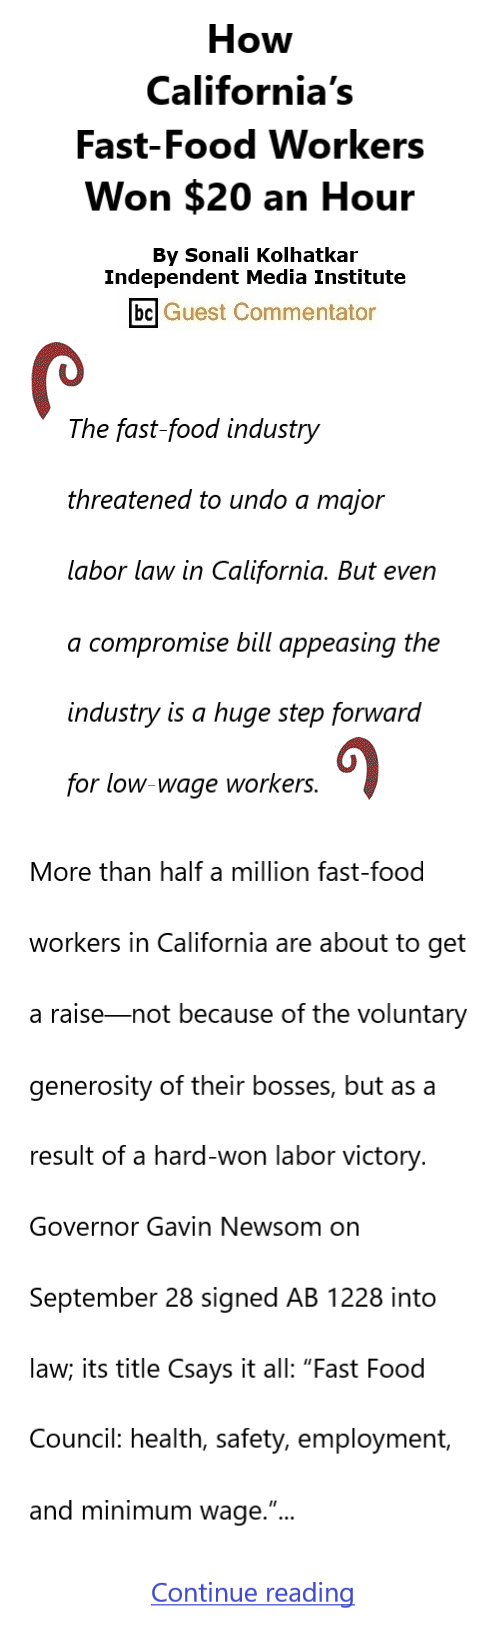 BlackCommentator.com Oct 19, 2023 - Issue 974: How California’s Fast-Food Workers Won $20 an Hour By Sonali Kolhatkar, Independent Media Institute, BC Guest Commentator